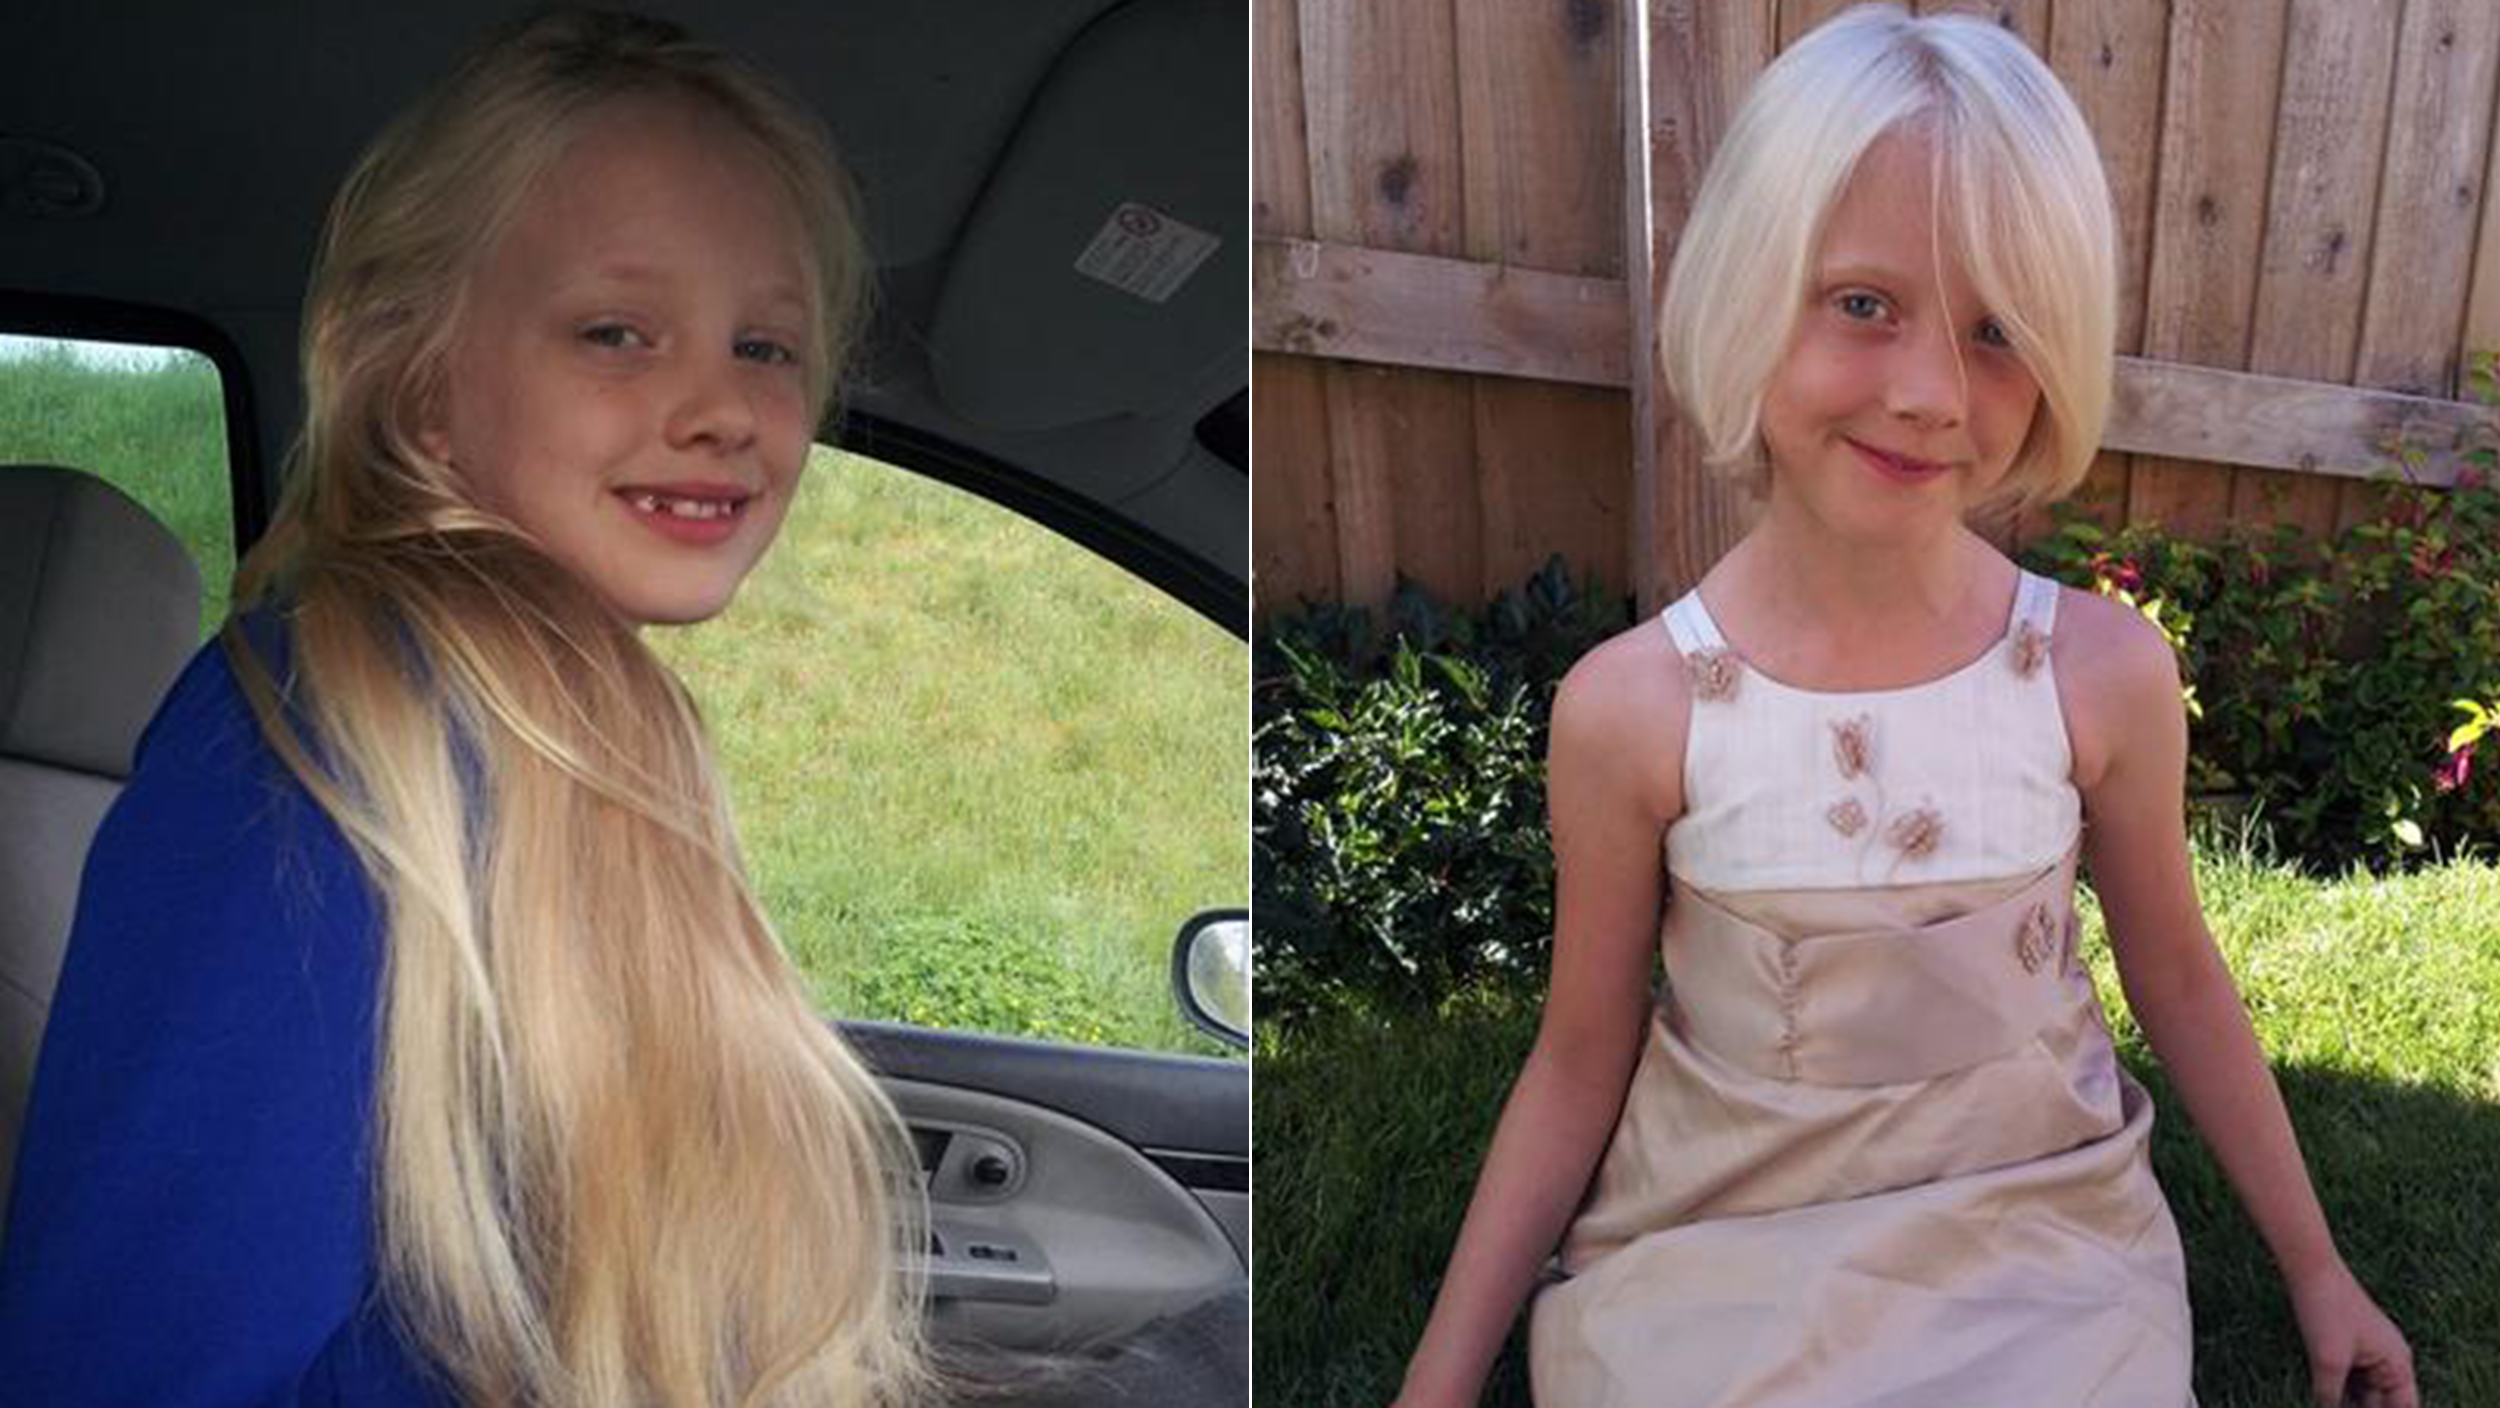 6-year-old 'Rapunzel' cuts her hair for kids with cancer